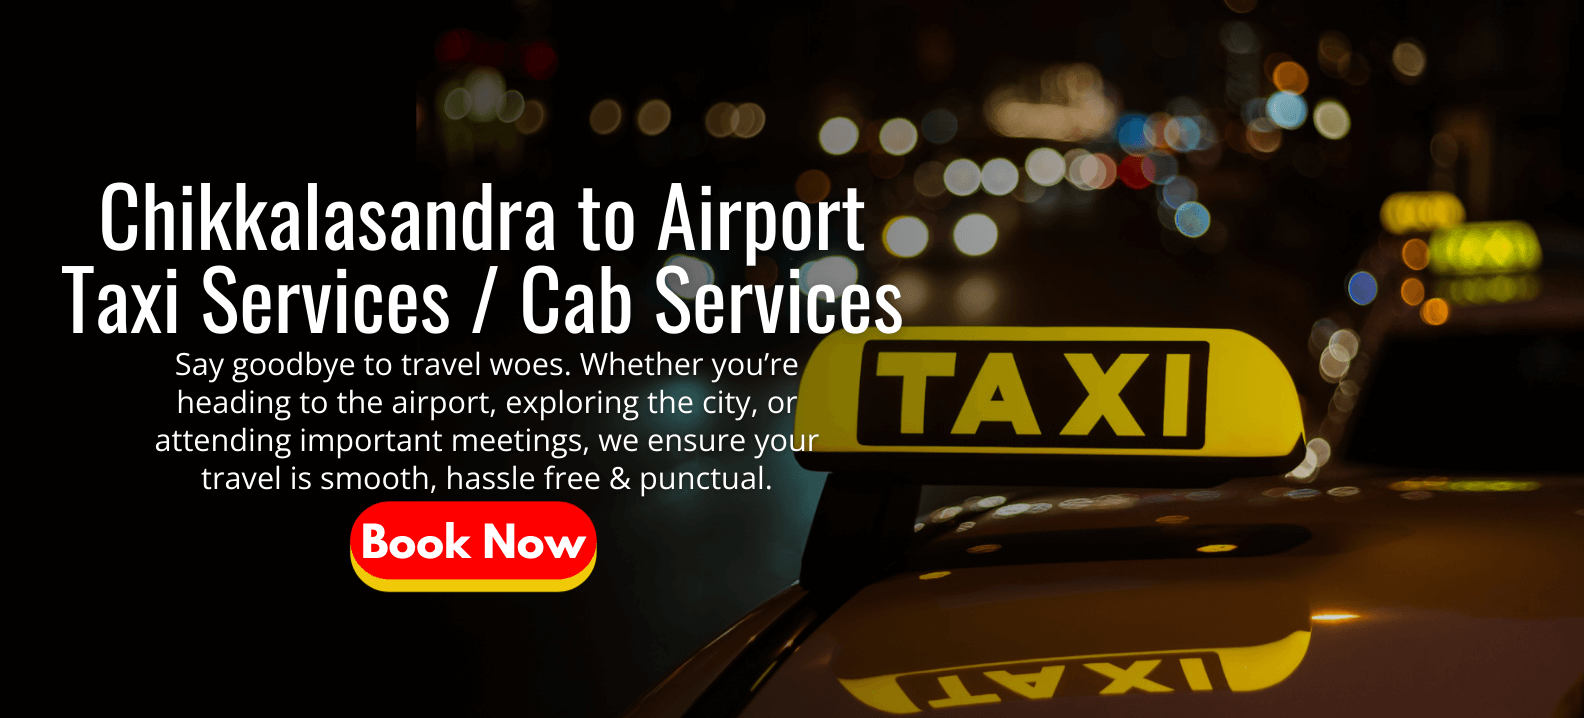 Chikkalasandra to Airport Taxi Services _ Cab Services